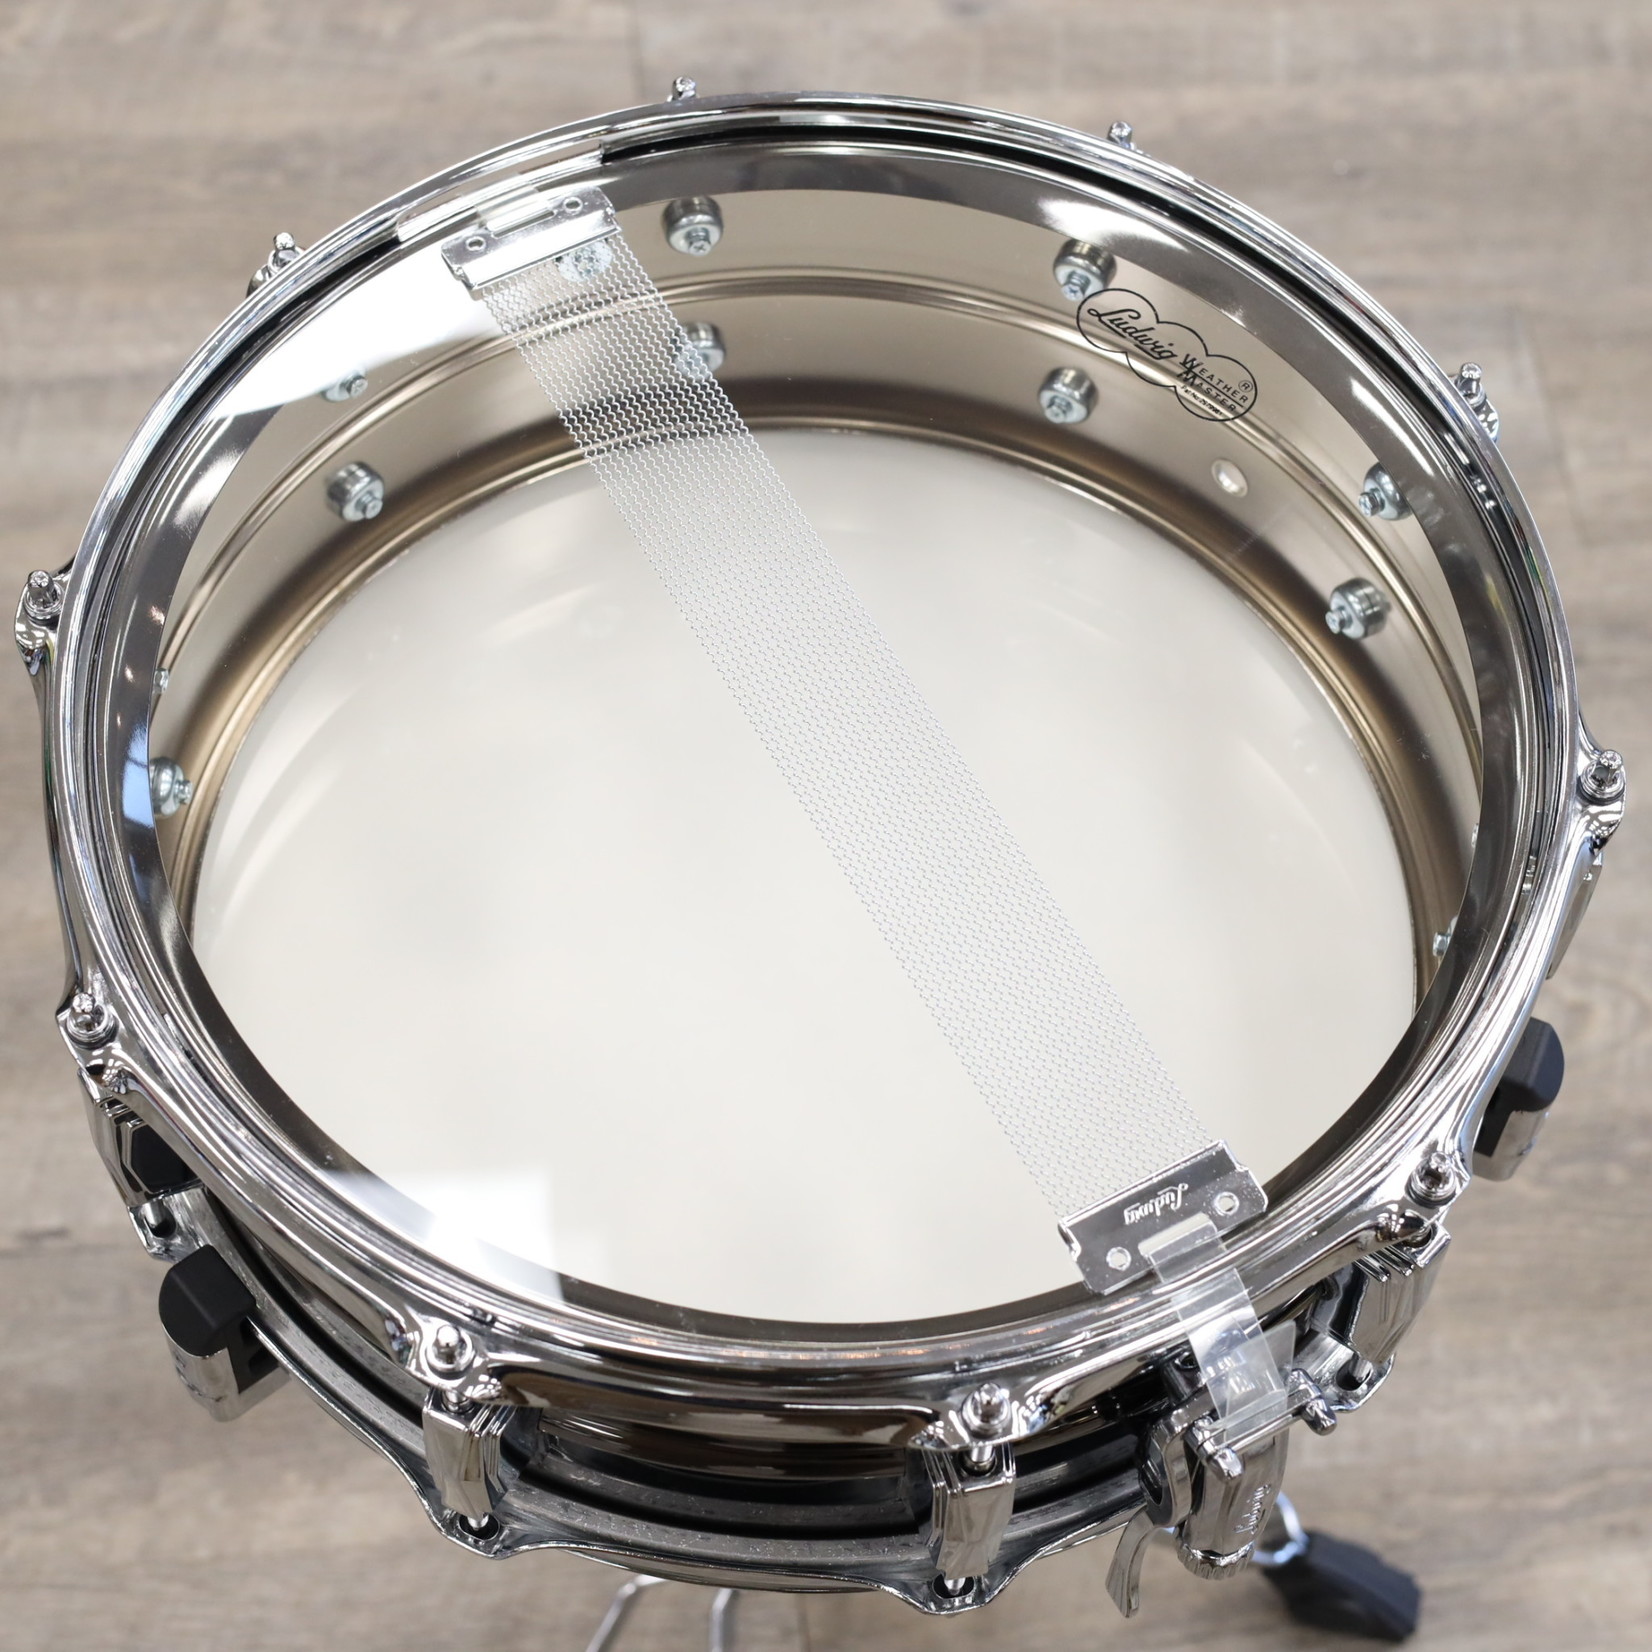 Ludwig Ludwig 5x14" Black Beauty Snare Drum LB416